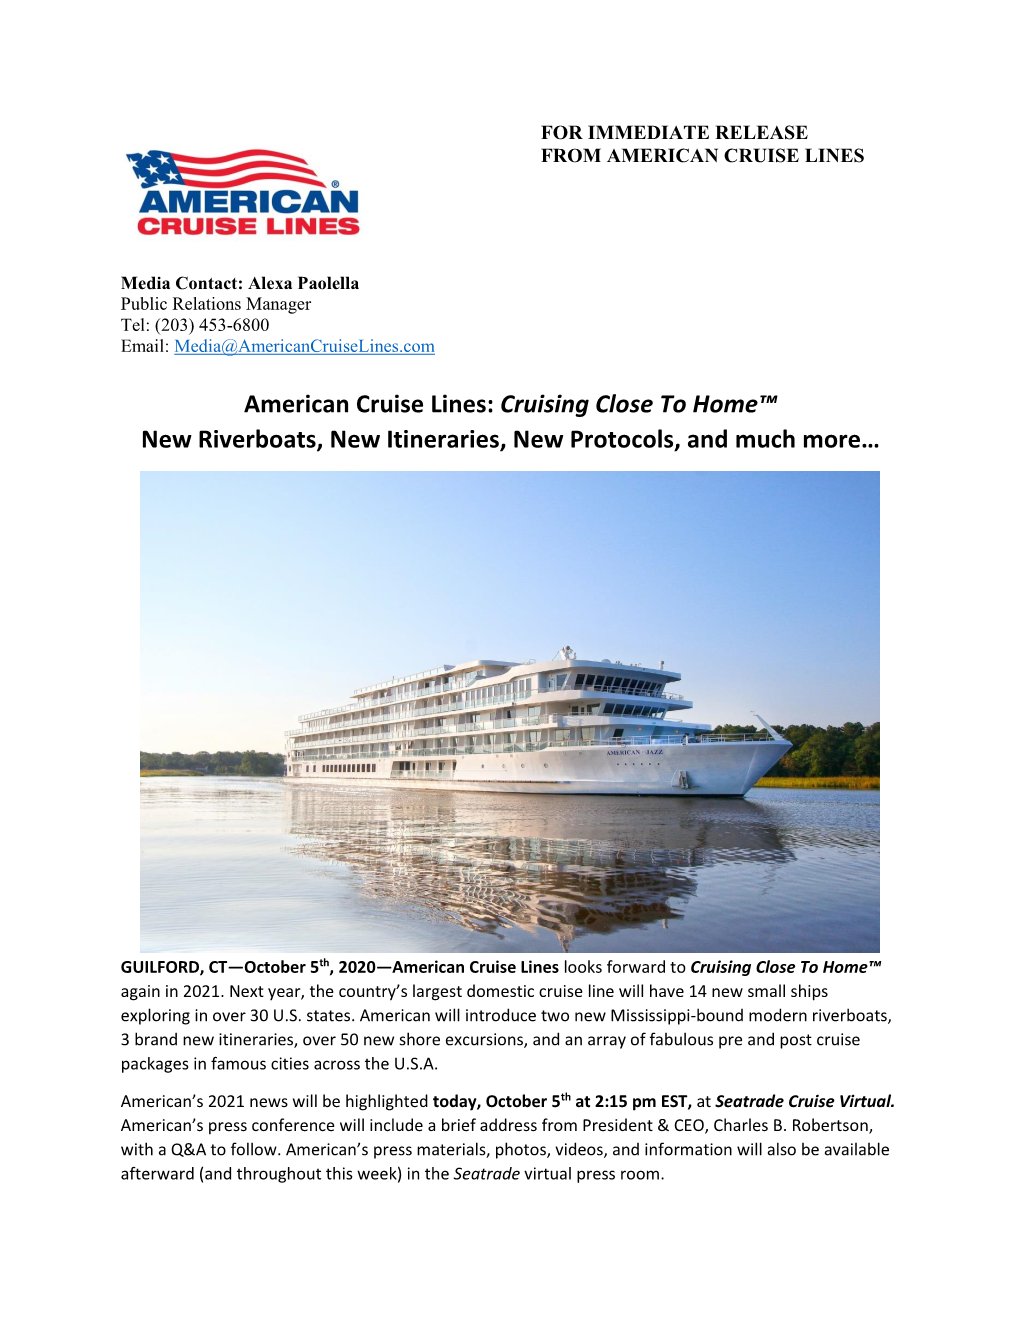 Cruising Close to Home™ New Riverboats, New Itineraries, New Protocols, and Much More…